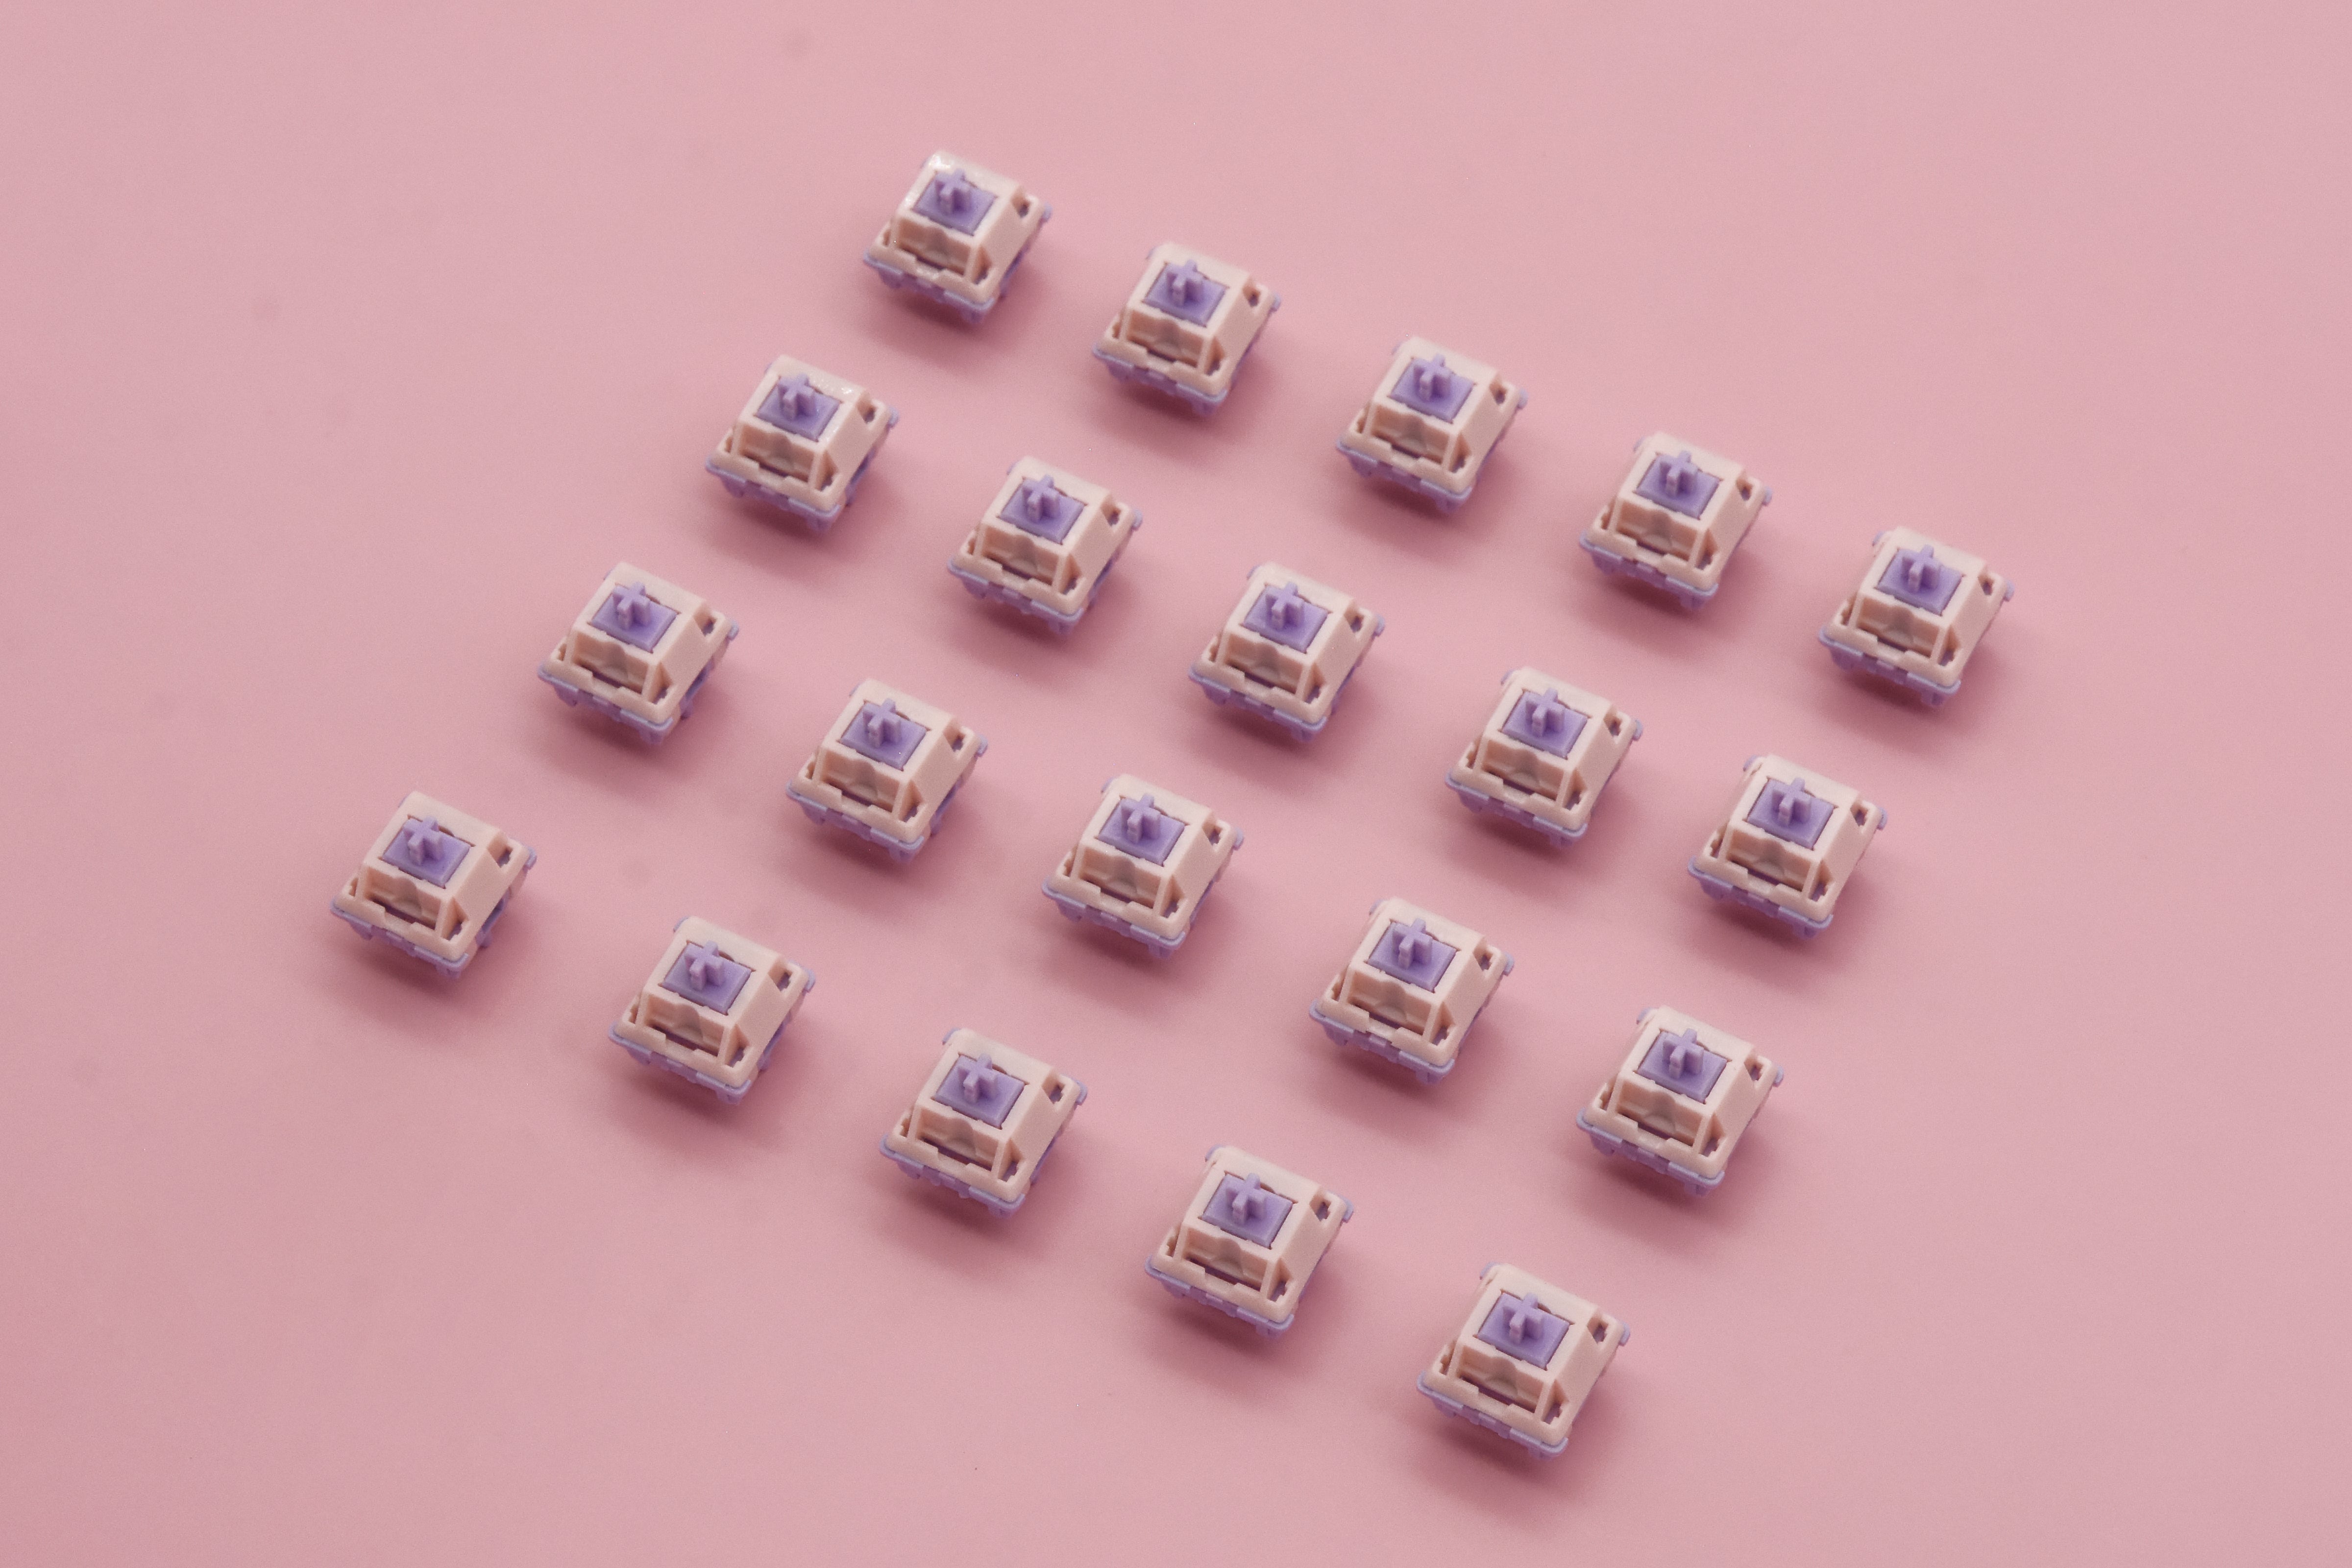 MMD PRINCESS LINEAR V2 SWITCH FACTORY LUBED EDITION (10PCS)